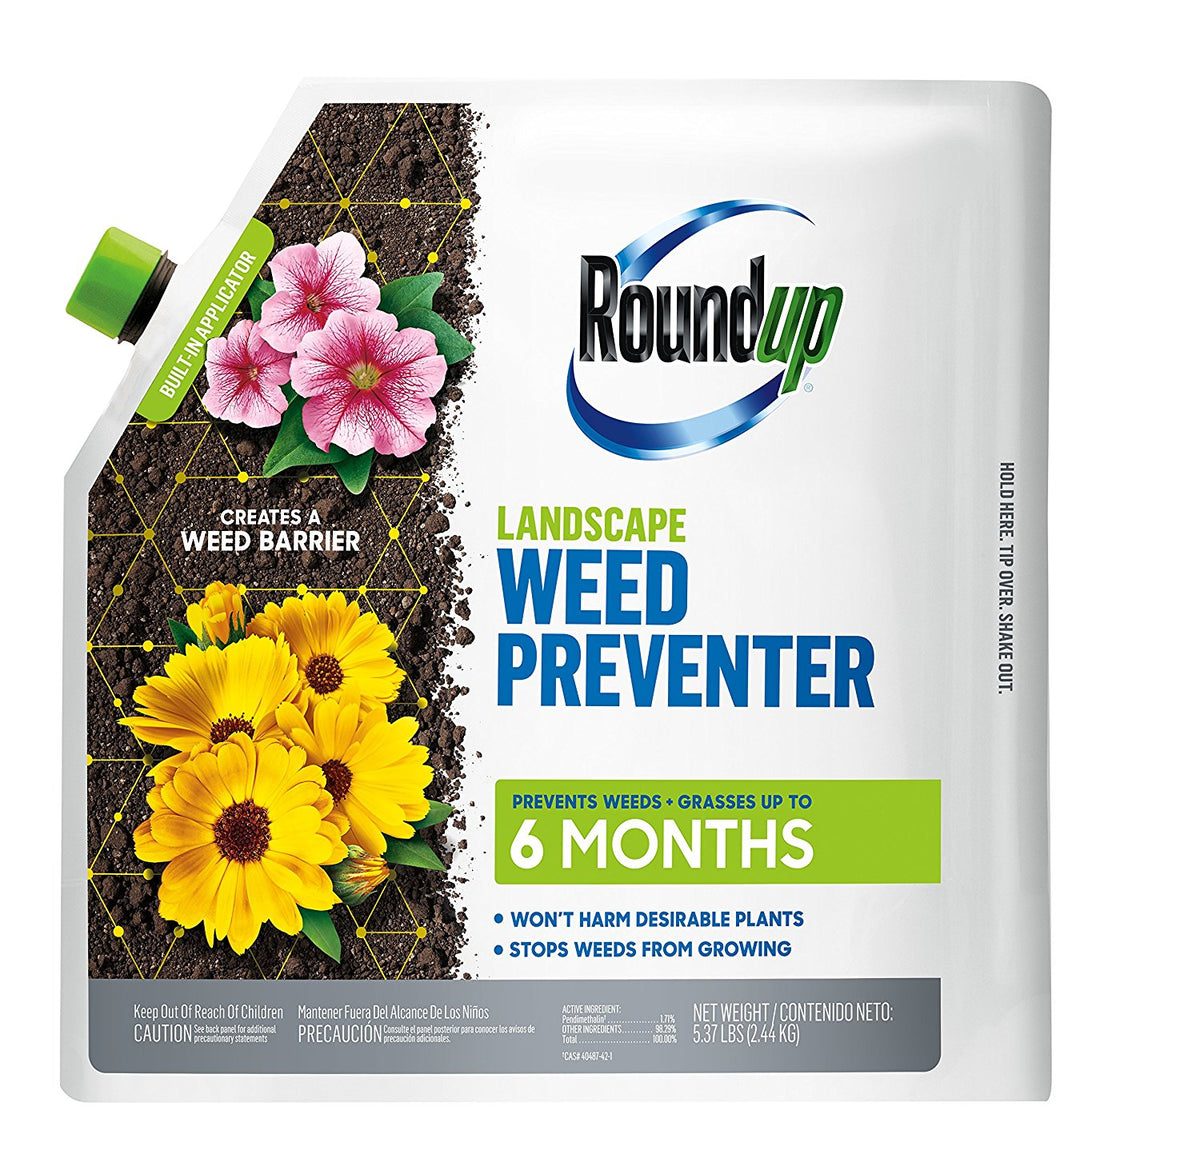 Roundup 4385106 Landscape Weed Preventer for Up To 6 Months, 5.4 Lb